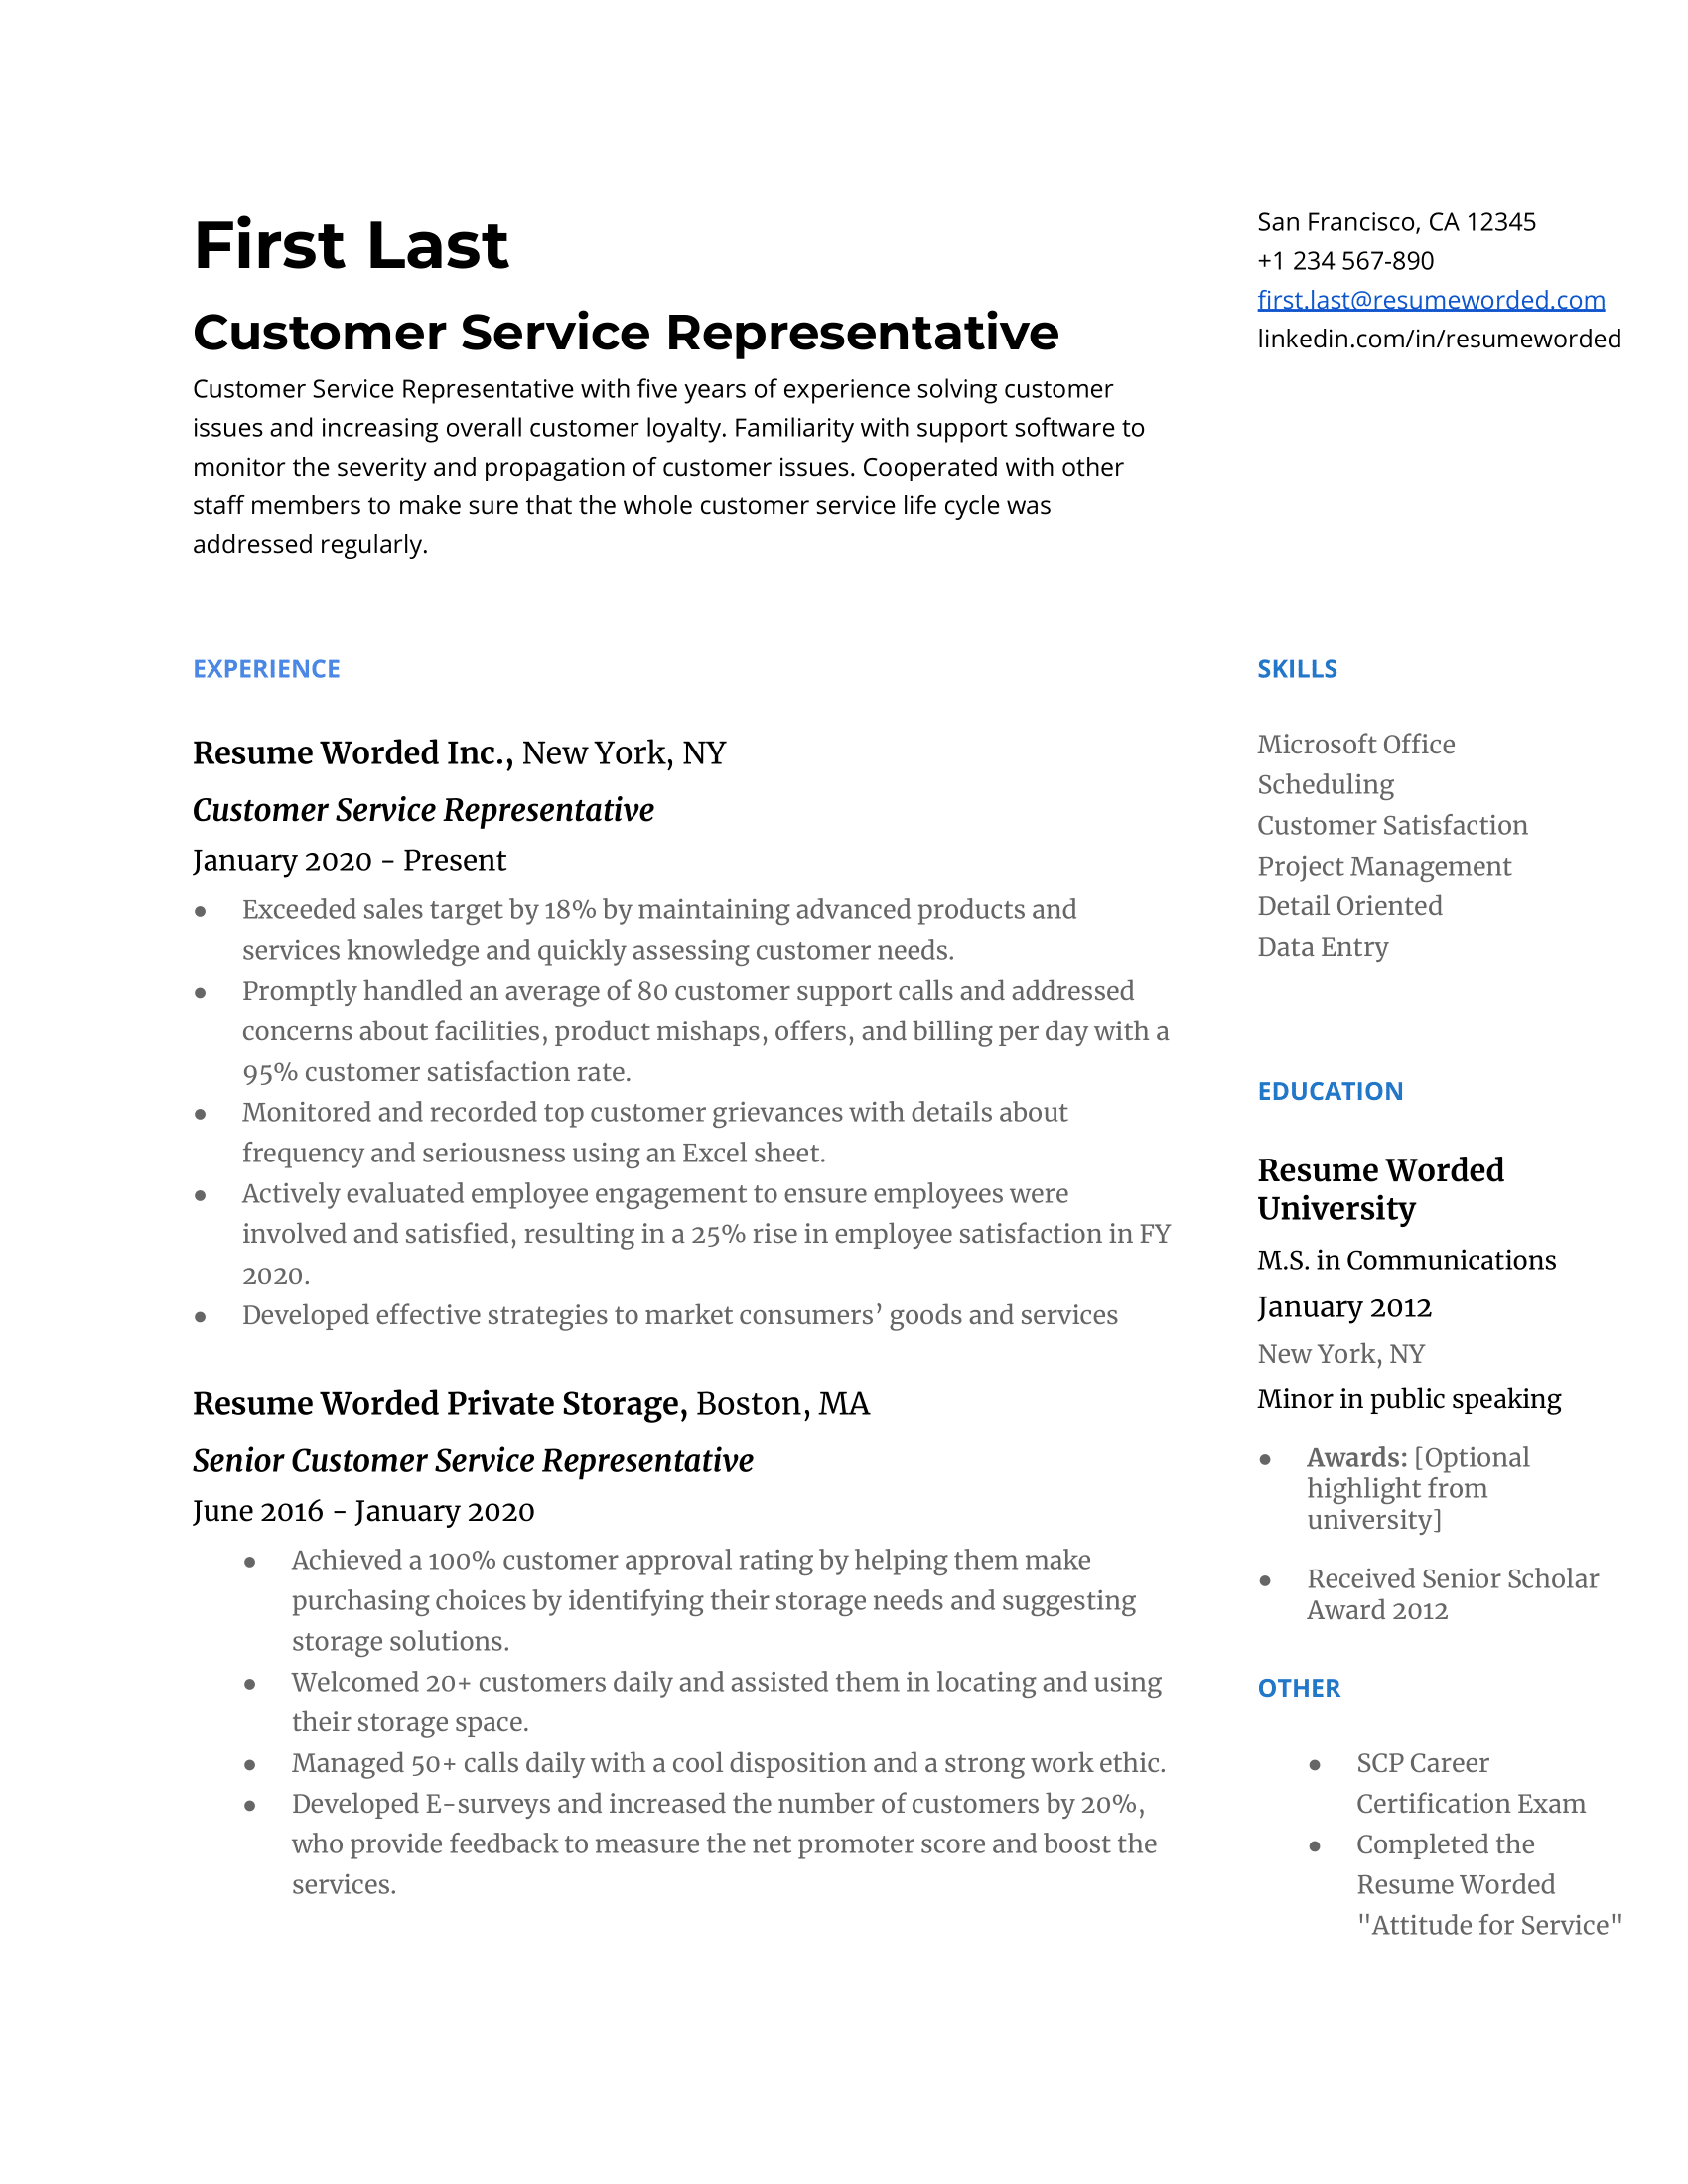 A resume for a customer service presentative with a dgeree in communications and experience as a sr. customer service representative.